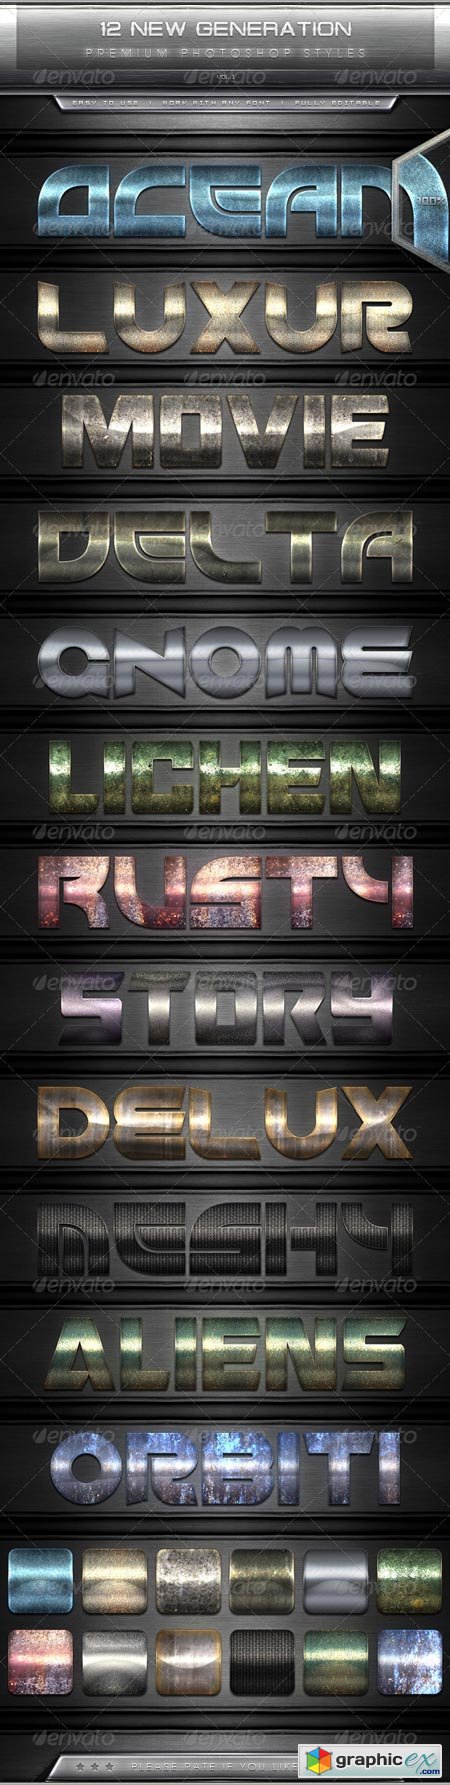 12 New Generation Text Effect Styles Vol.1 7630718